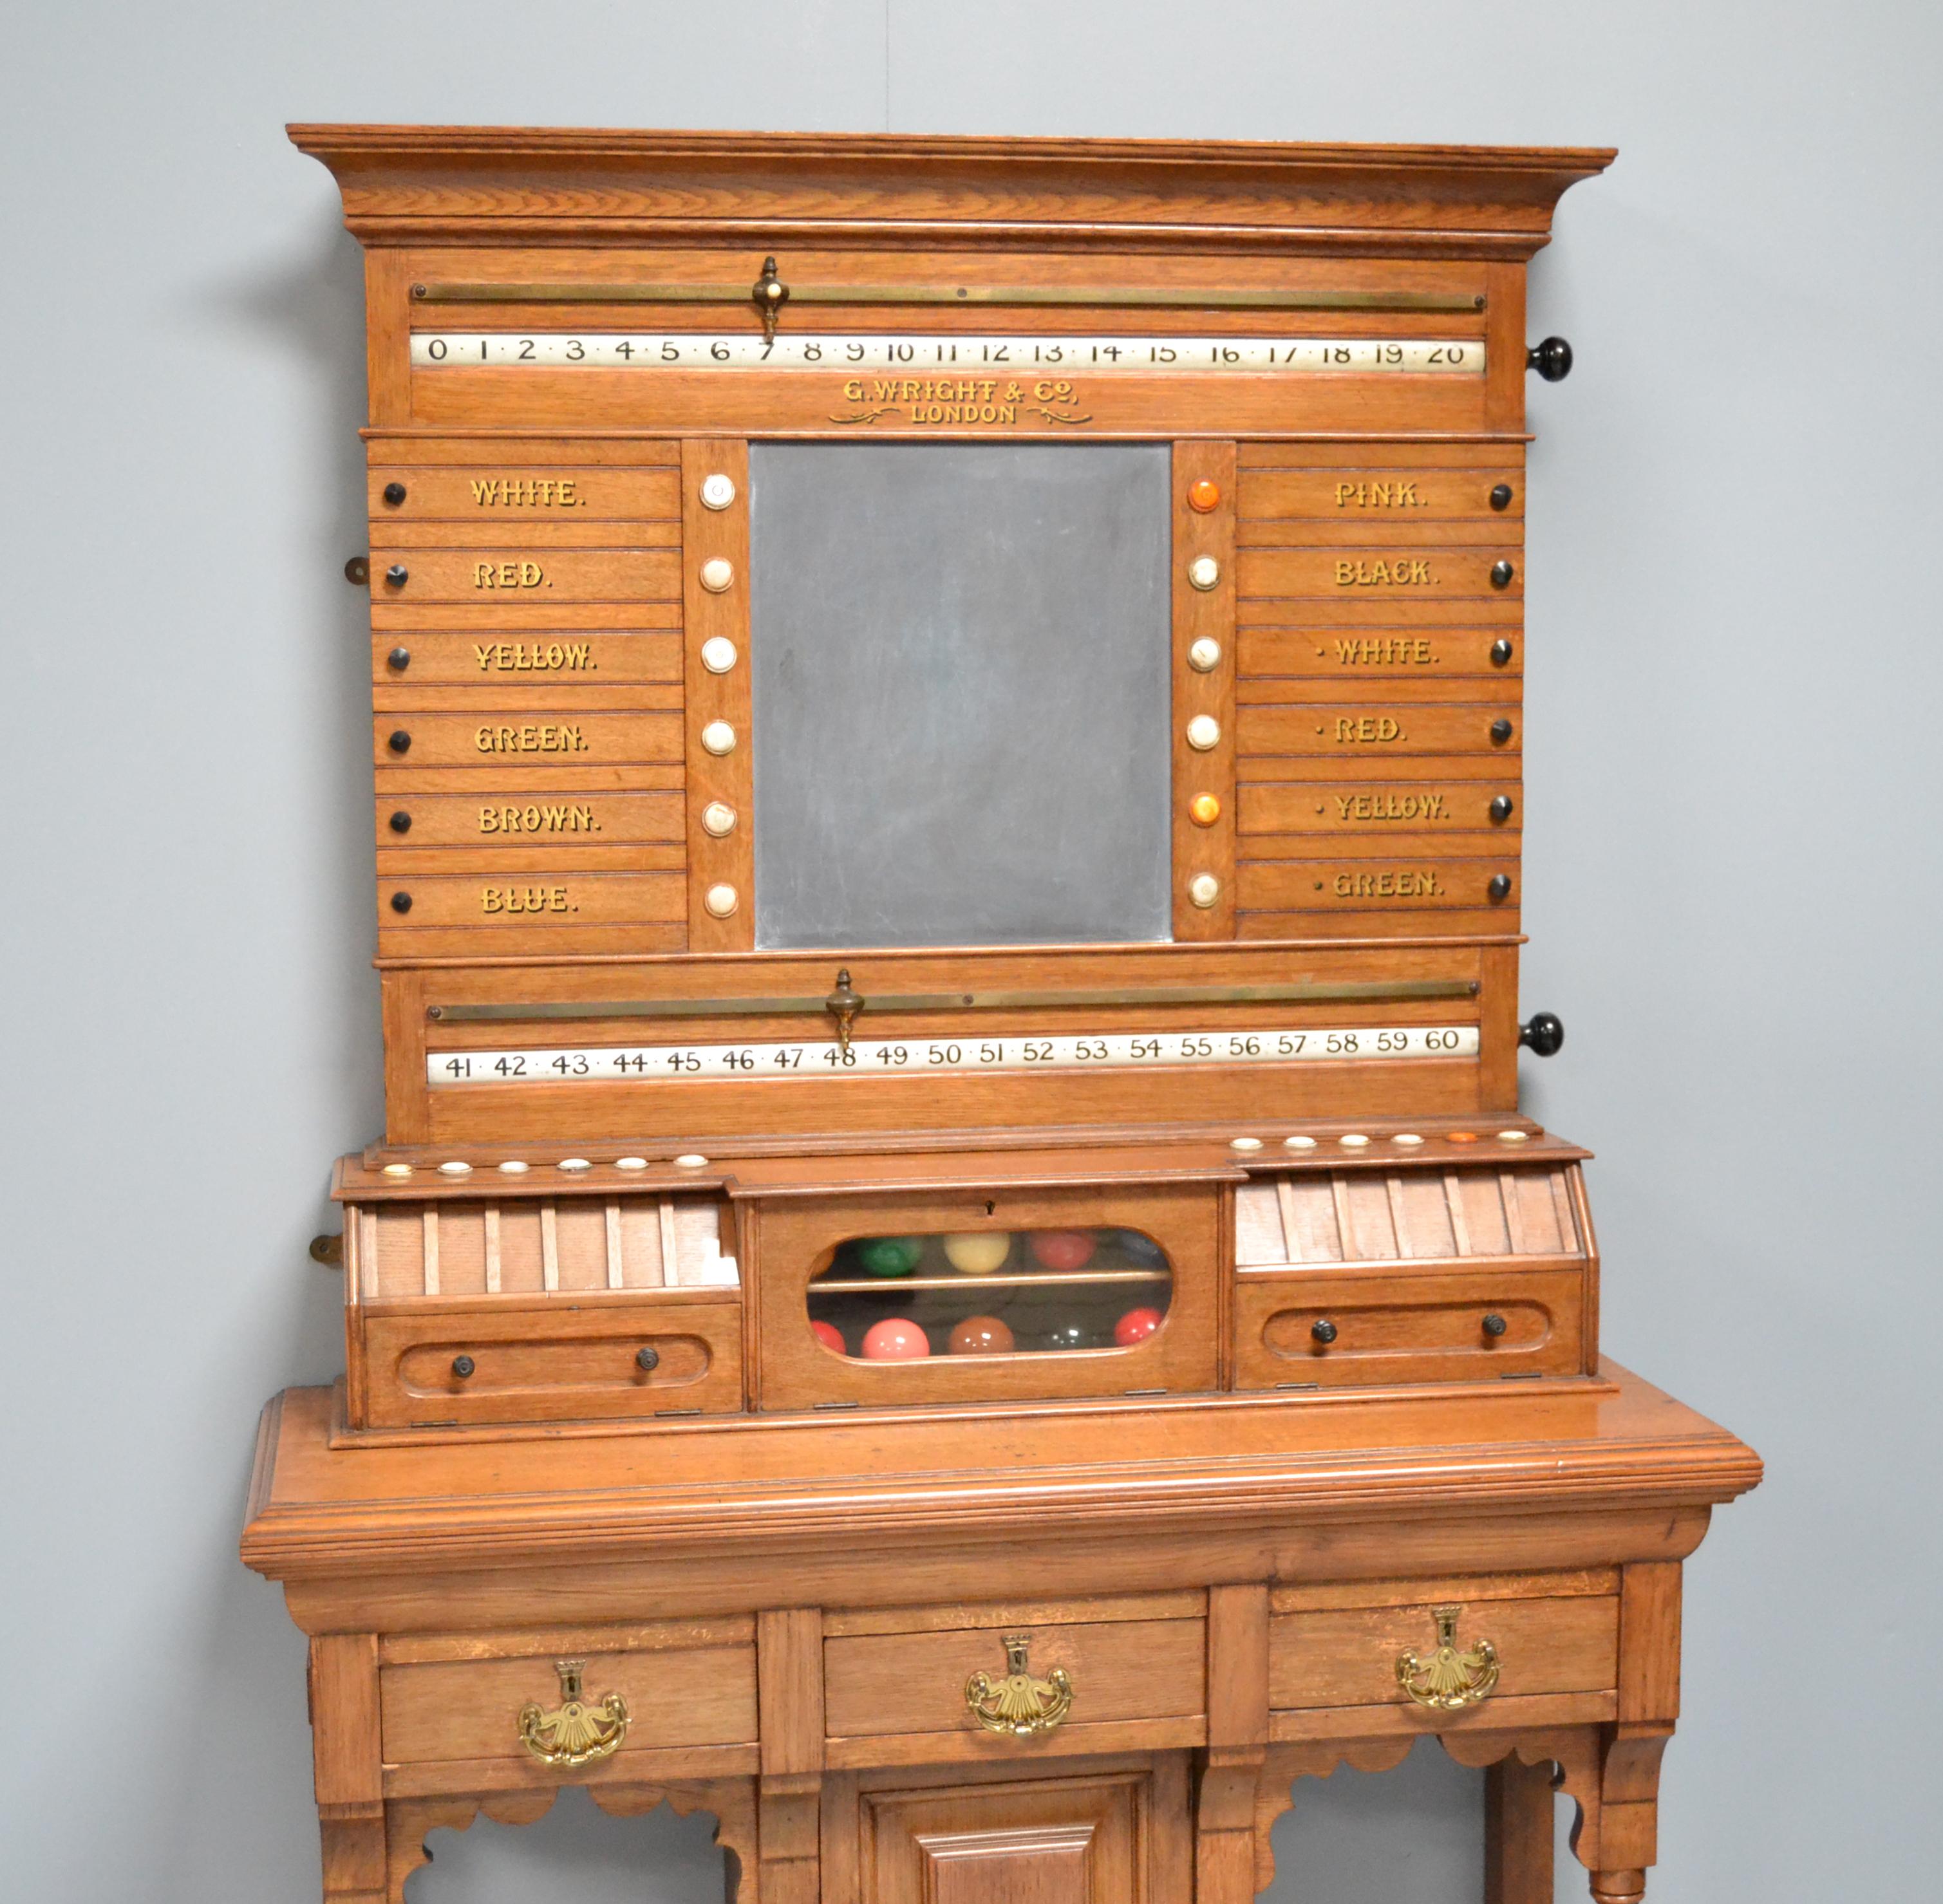 A solid oak free standing scoring cabinet by George Wright of London circa 1890. 

A Country House cabinet to score billiards, snooker and Life pool, central slate panel flanked by revolving number bars and lettered Life pool panels with inlaid